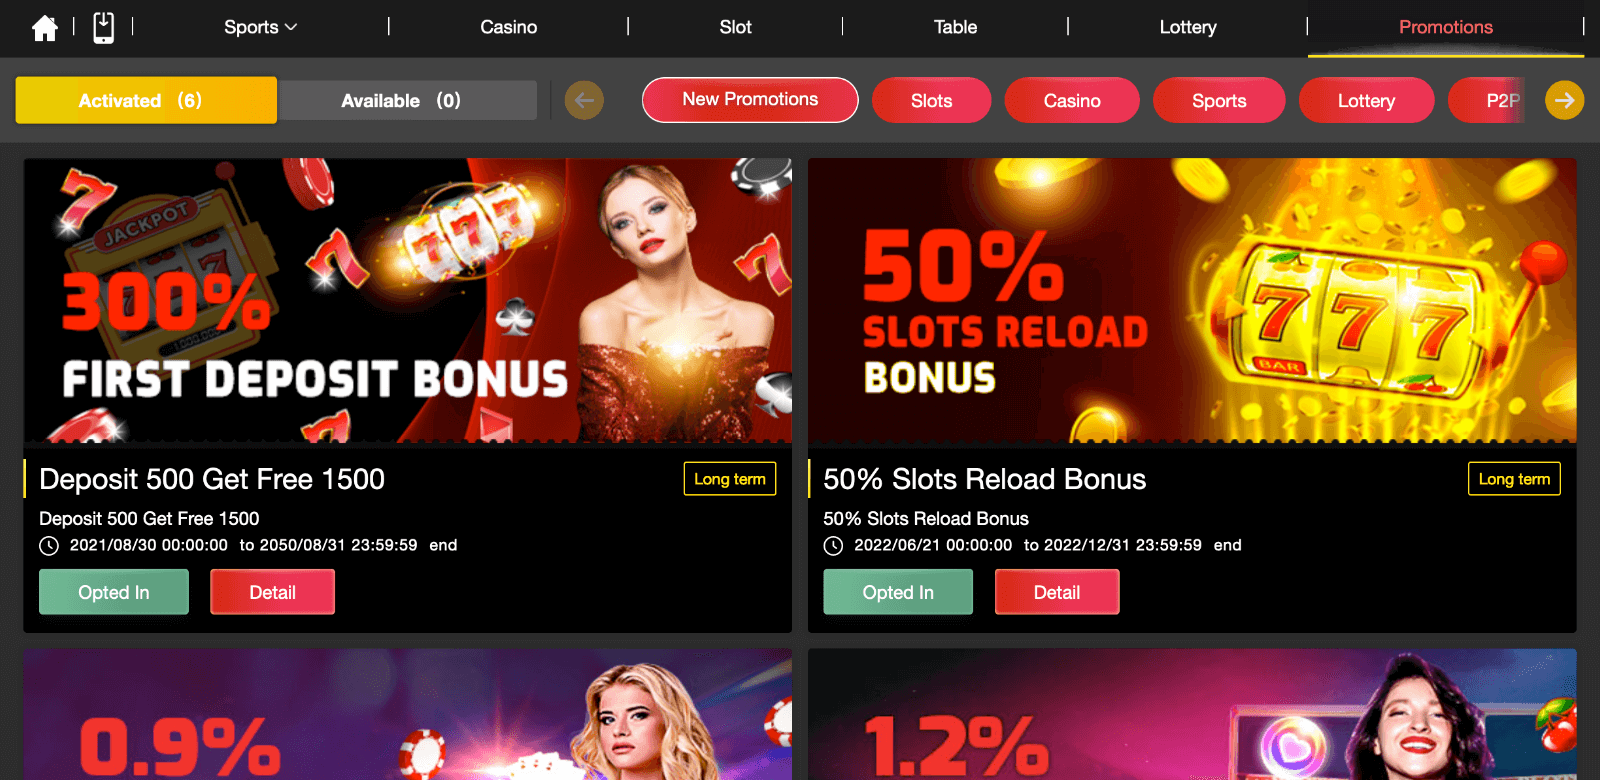 Marvelbet offers many different bonuses and promotions